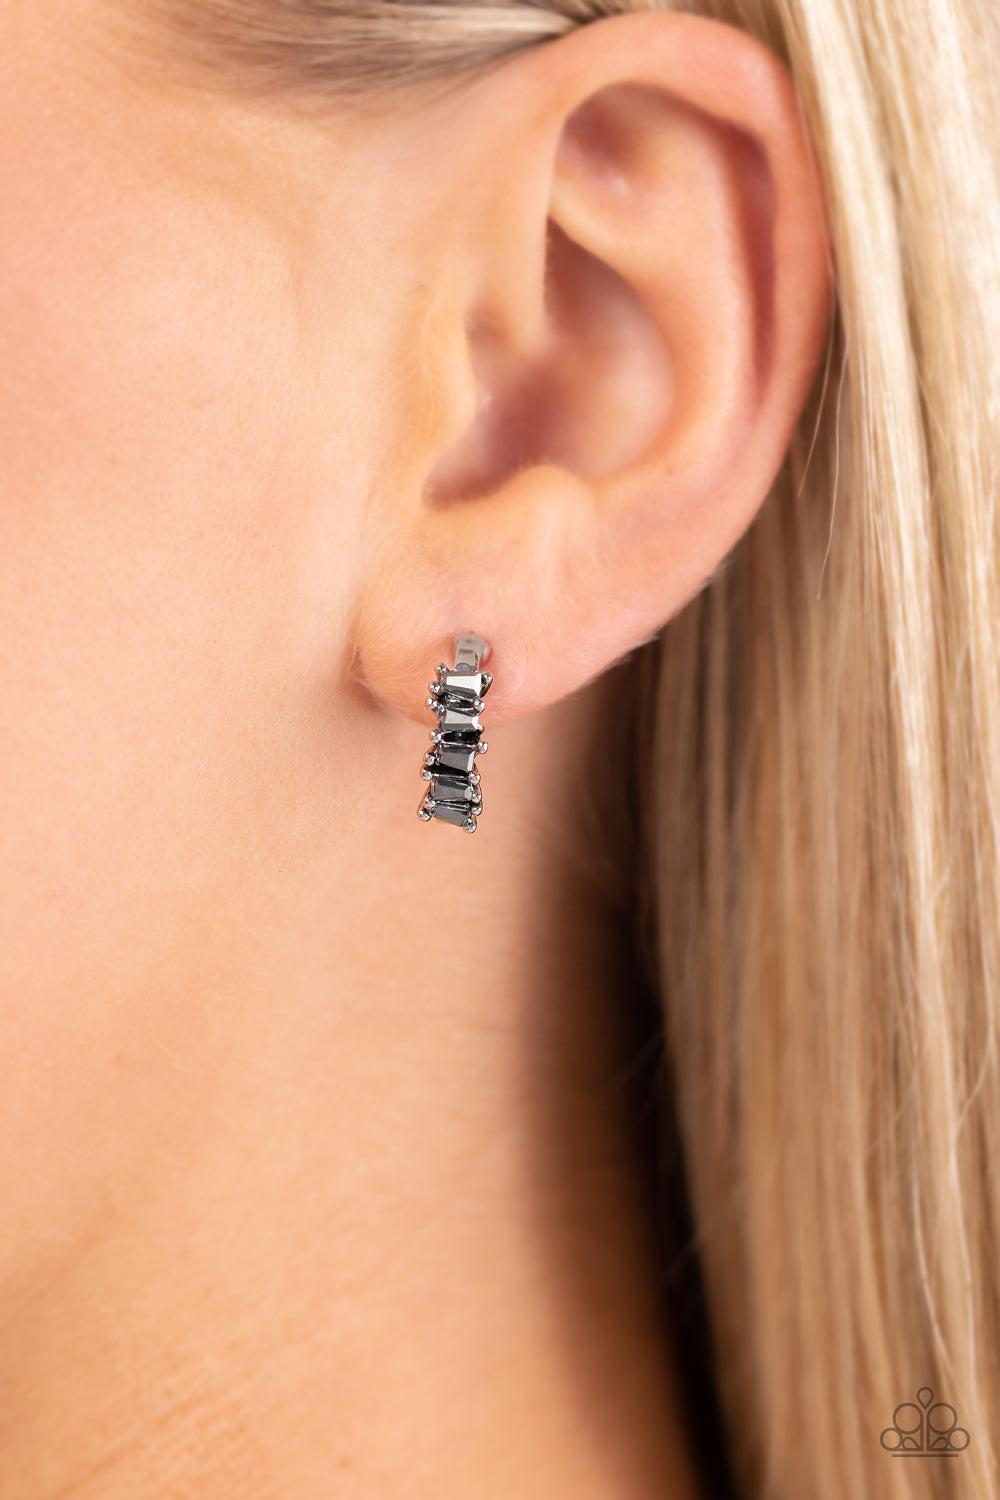 Rugged Rockstar Silver Hoop Earrings - Paparazzi Accessories- lightbox - CarasShop.com - $5 Jewelry by Cara Jewels